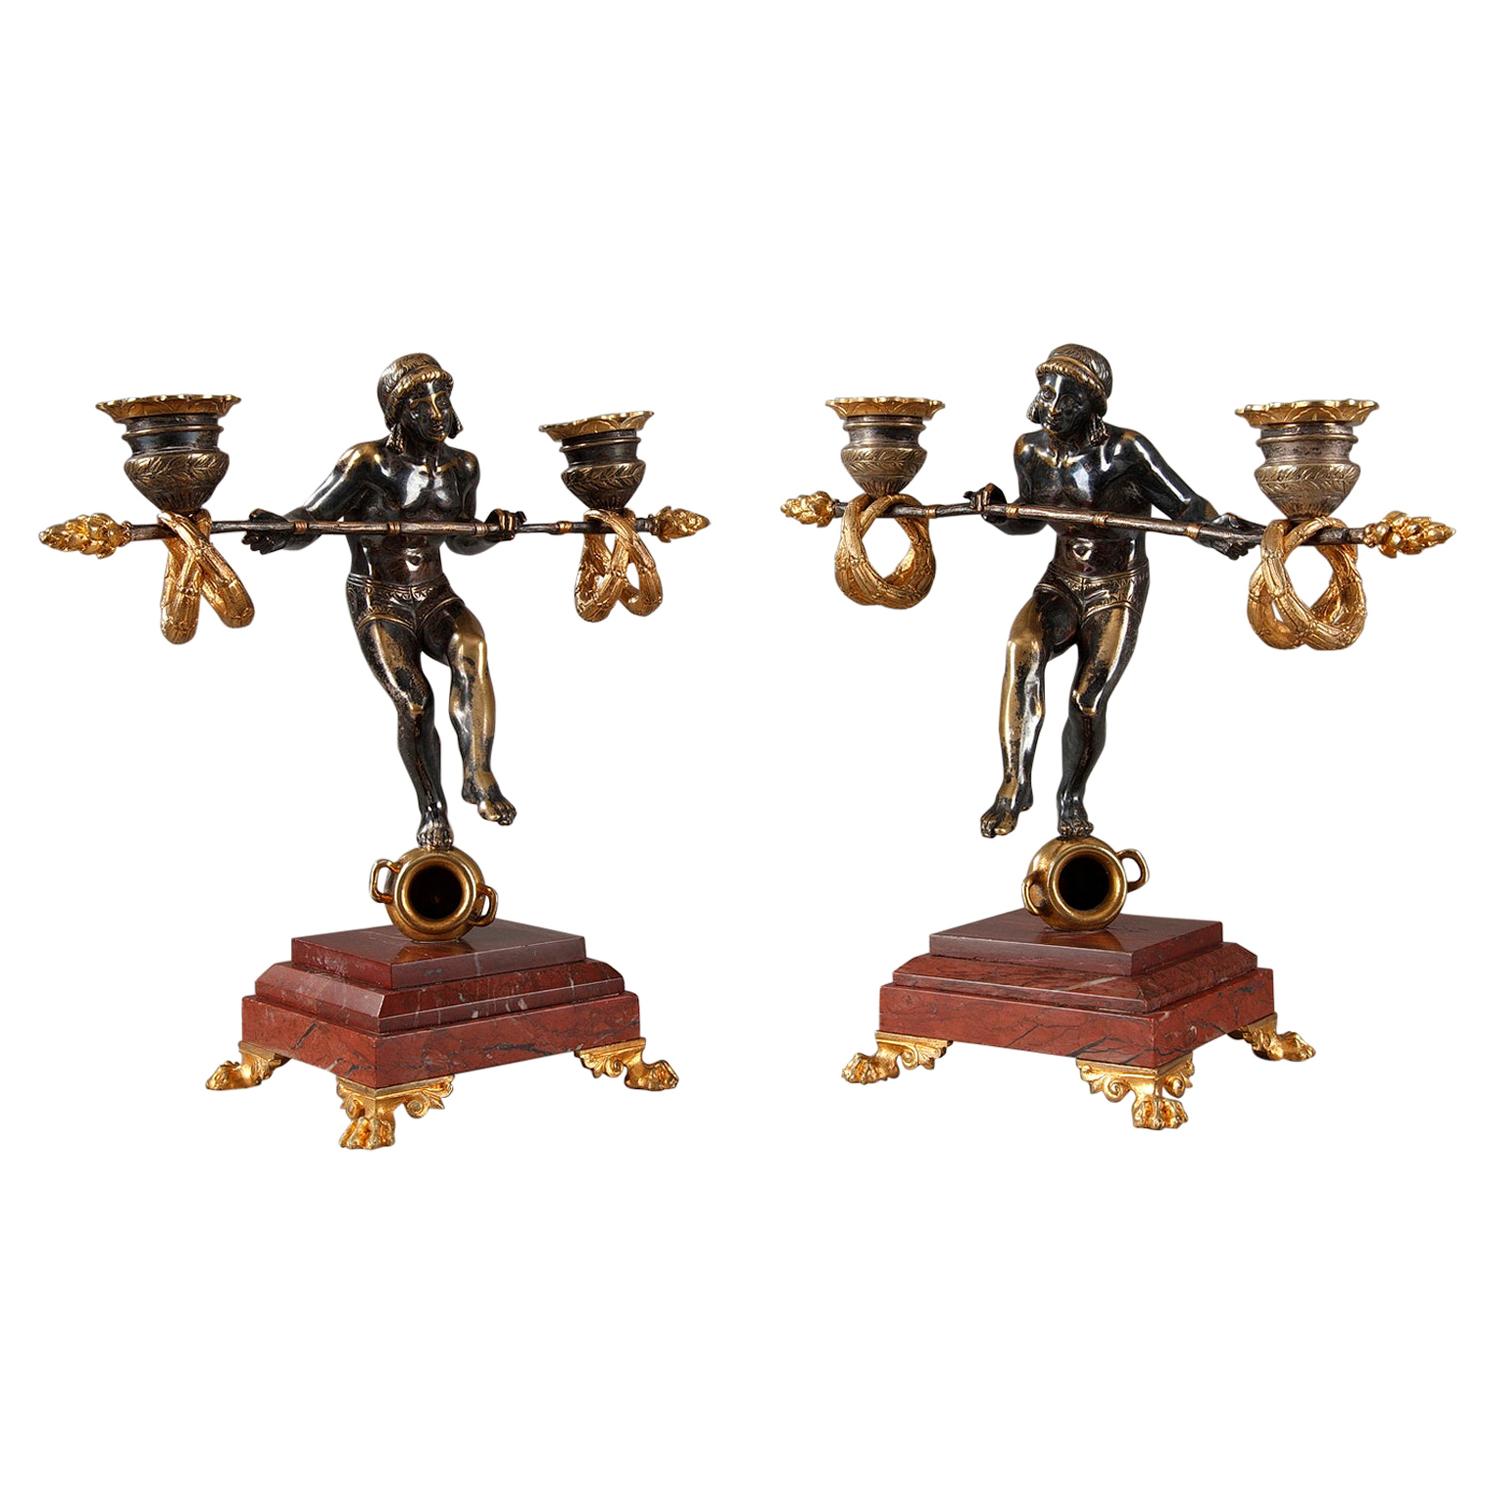 Late 19th Century Pair of Candlesticks by Emile Carlier